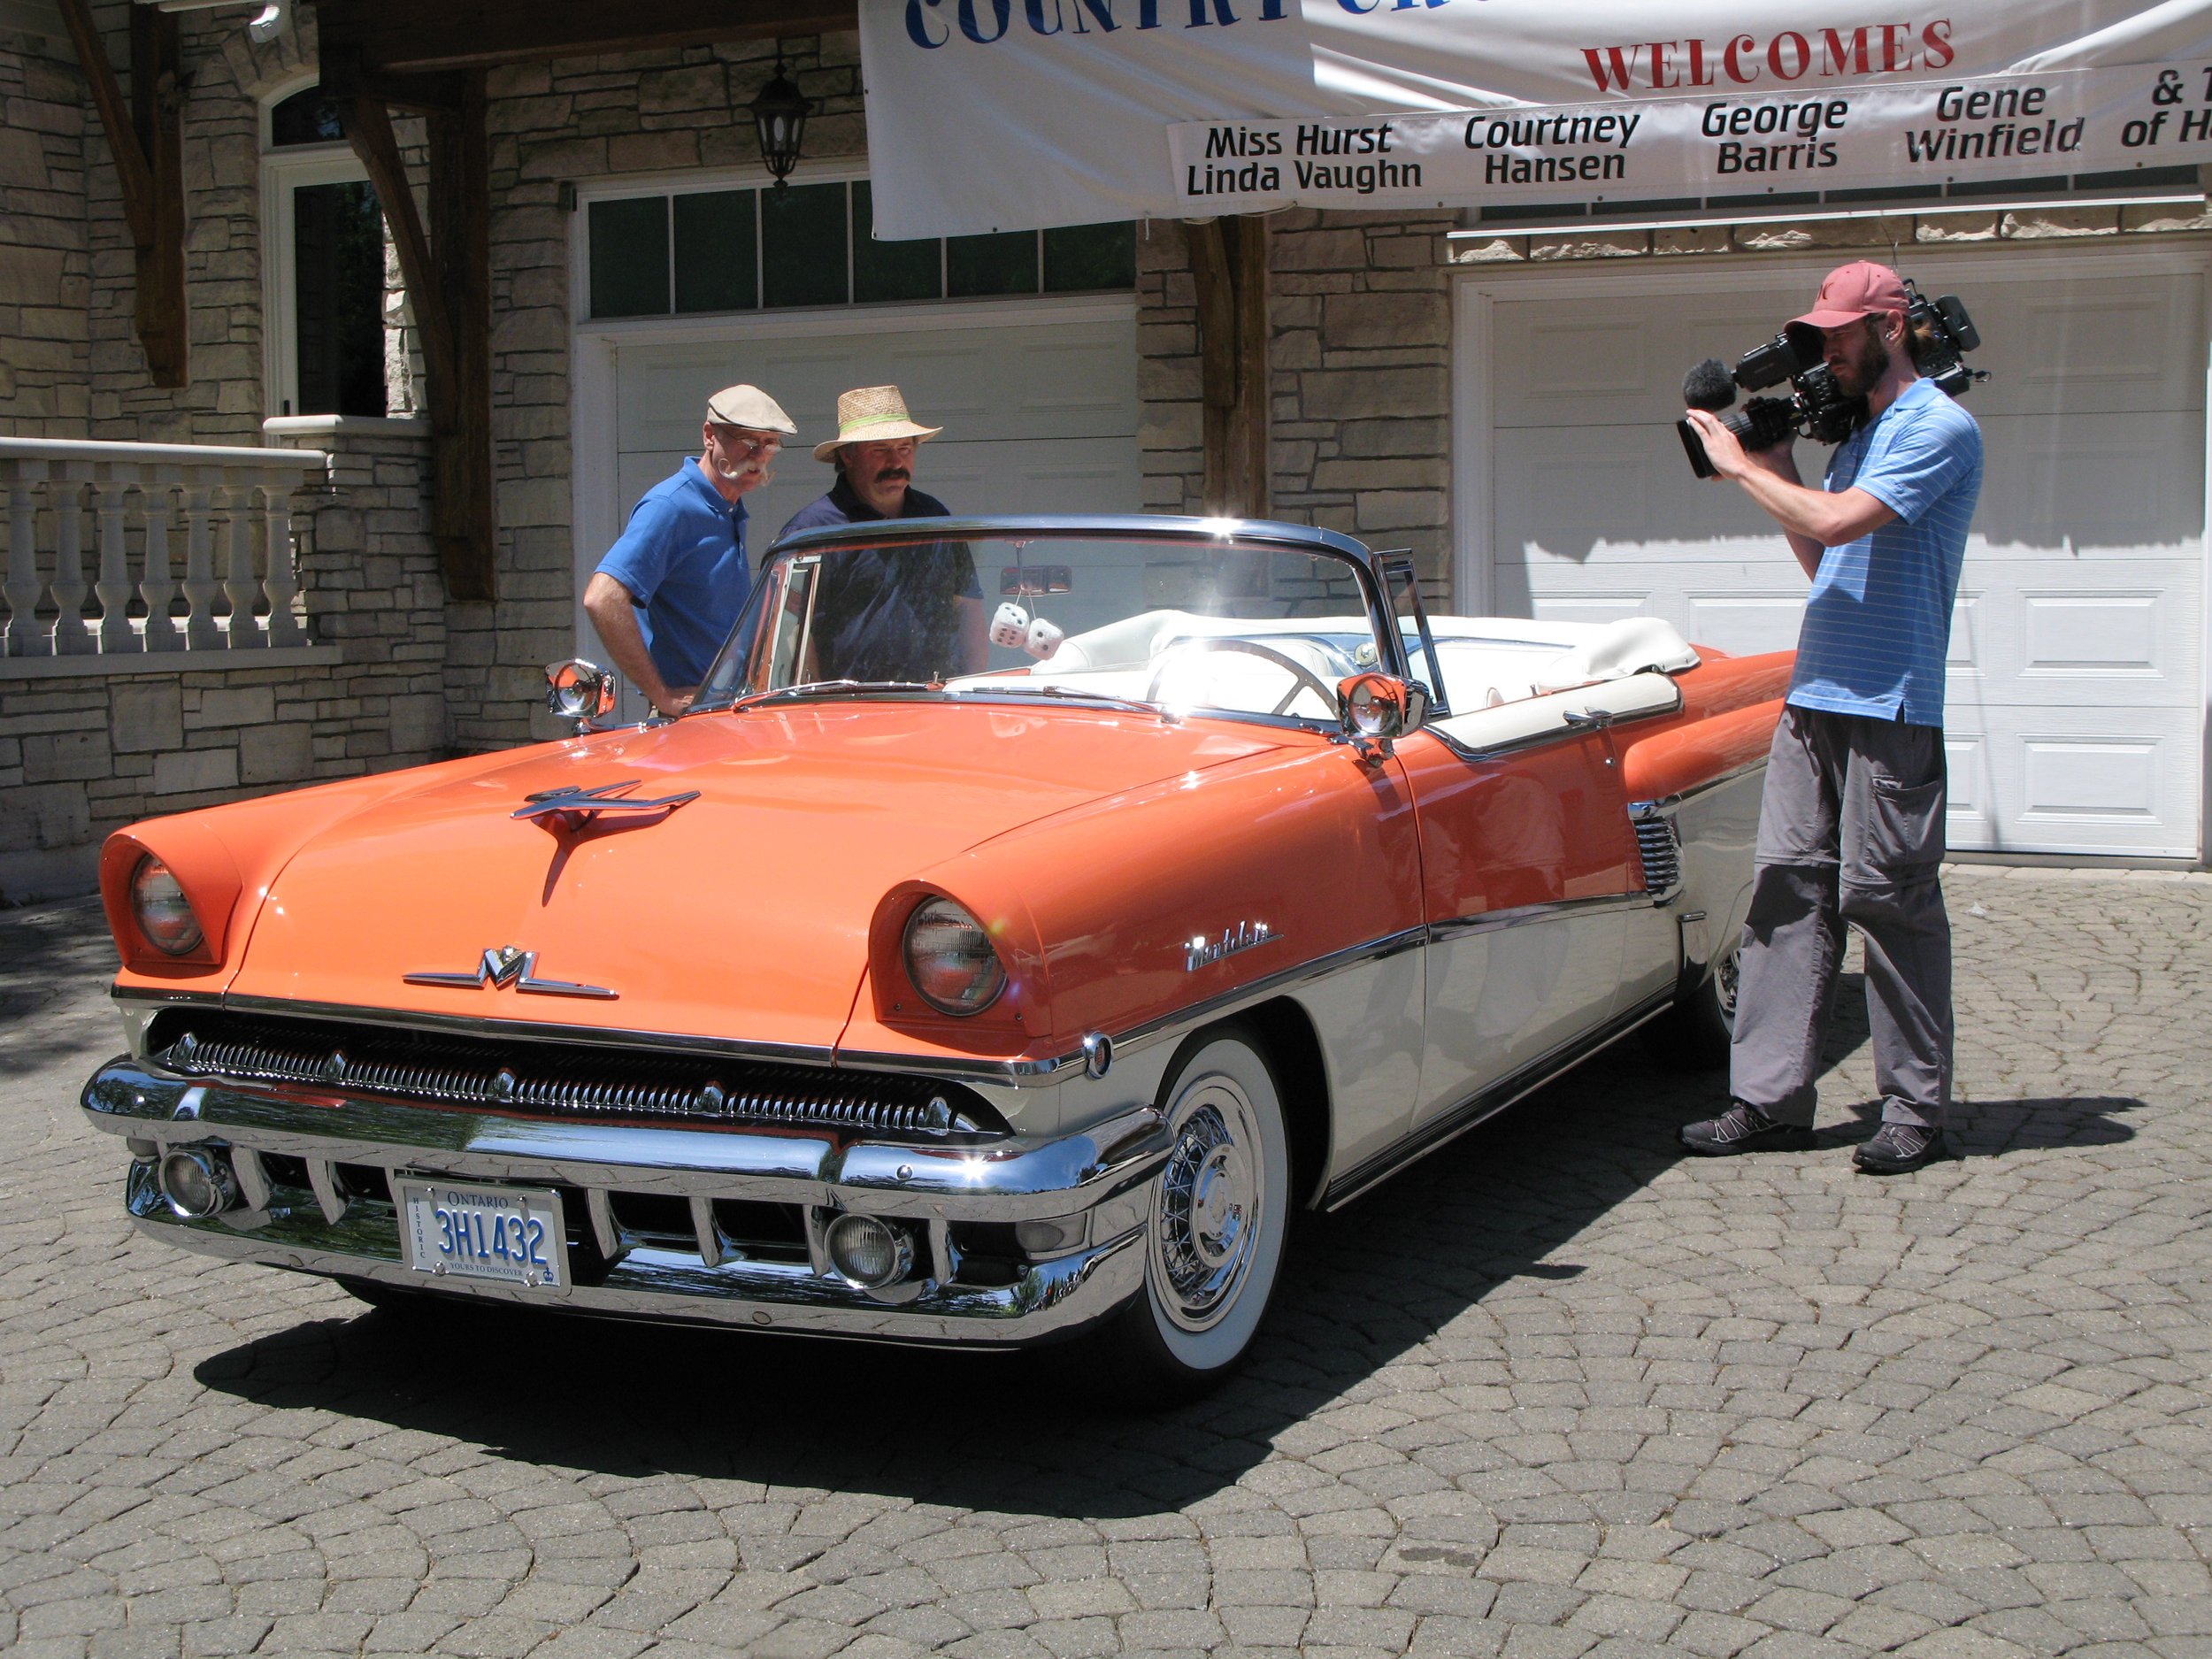 Dennis Gage, Filming - My Classic Car Show, 2015 - Episode 16